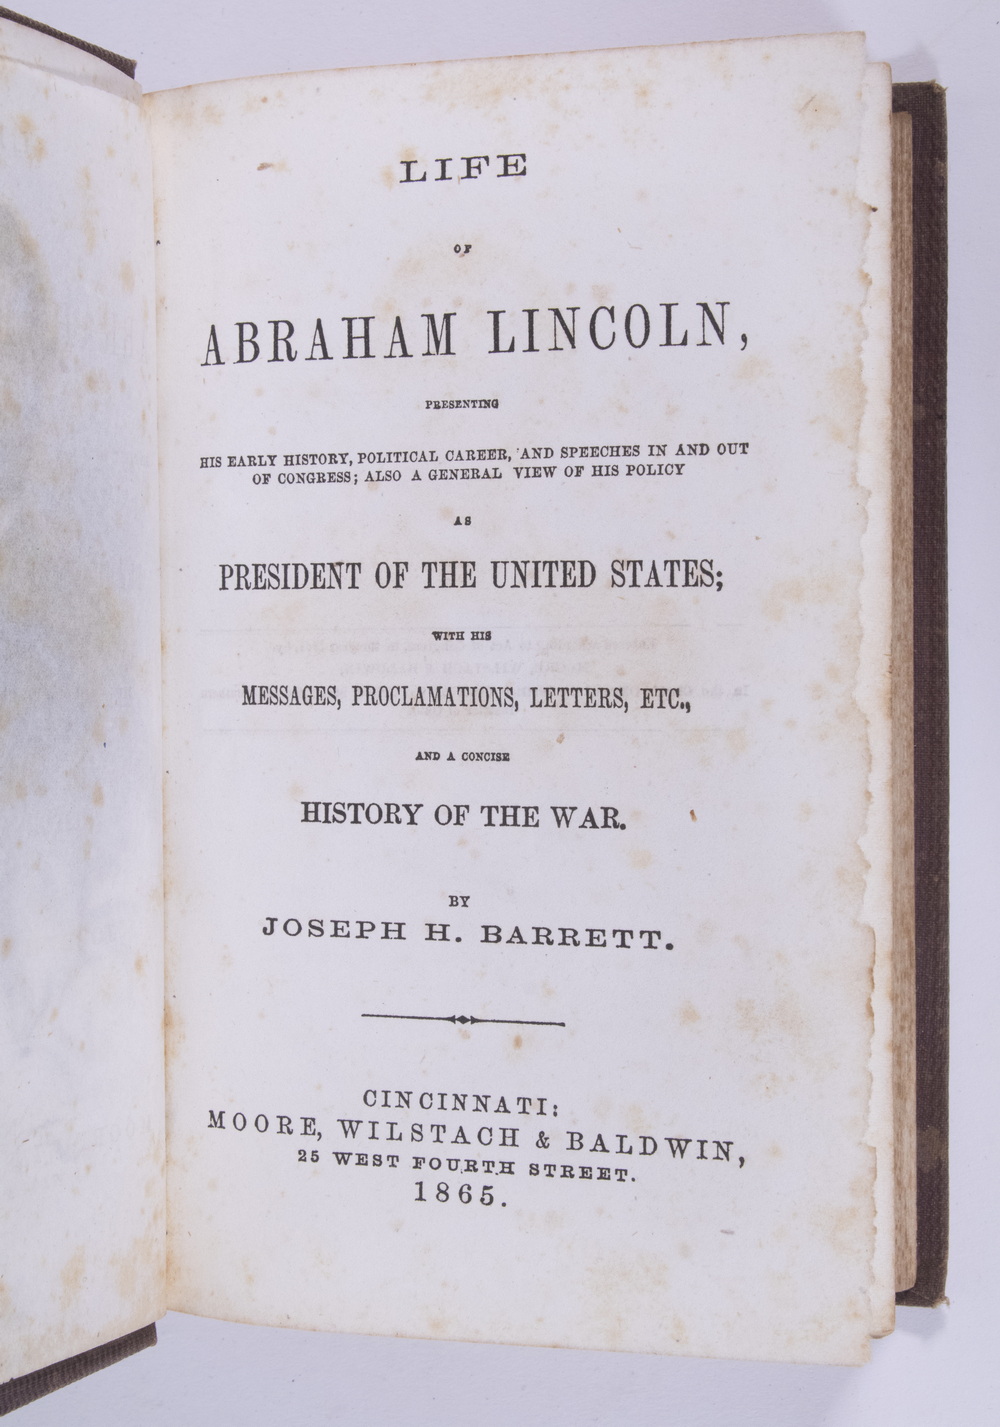 BARRETT 1864 LIFE OF LINCOLN, ONE OF